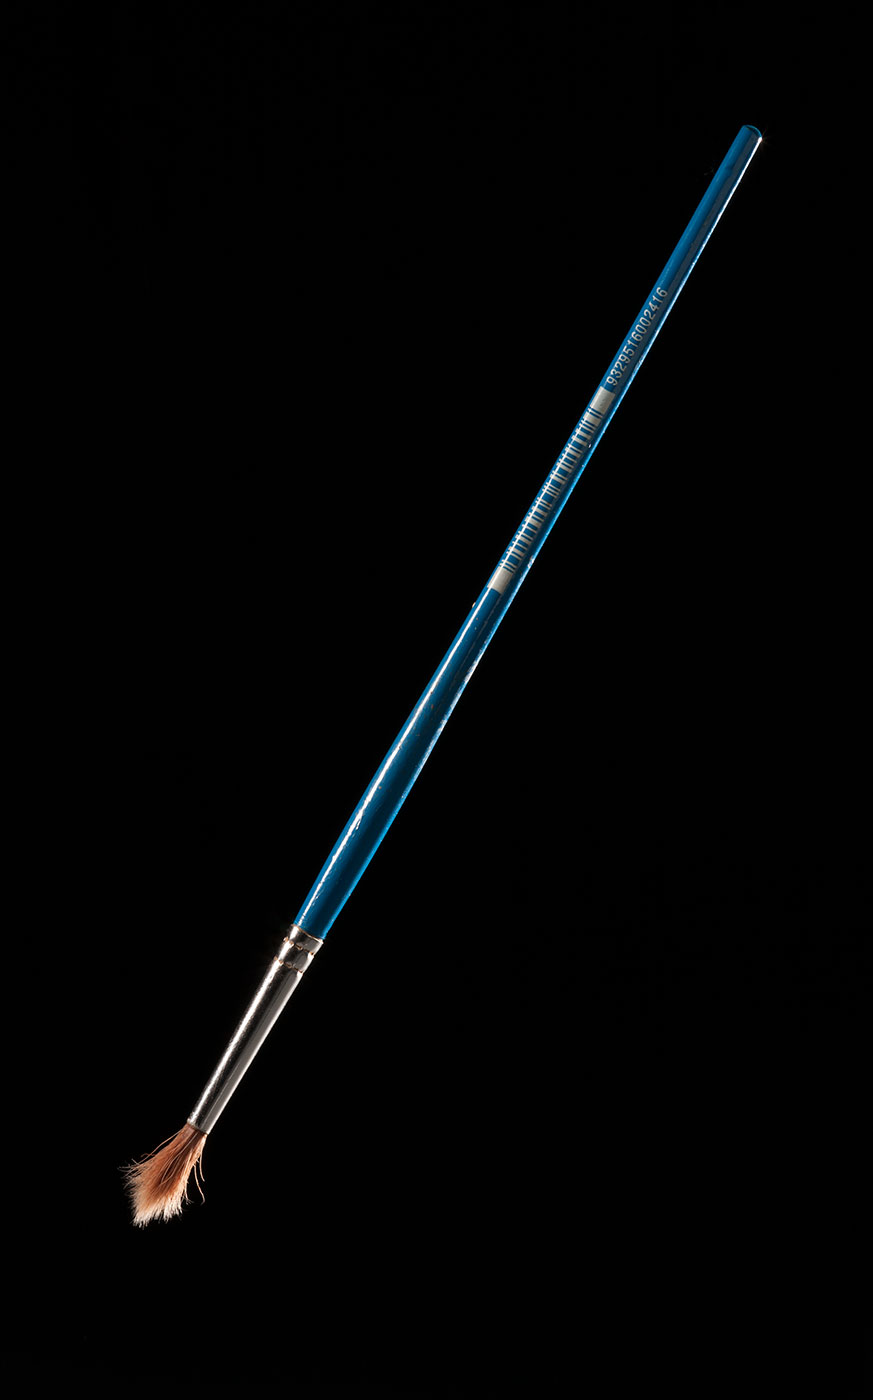 Paint brush with blue handle. - click to view larger image